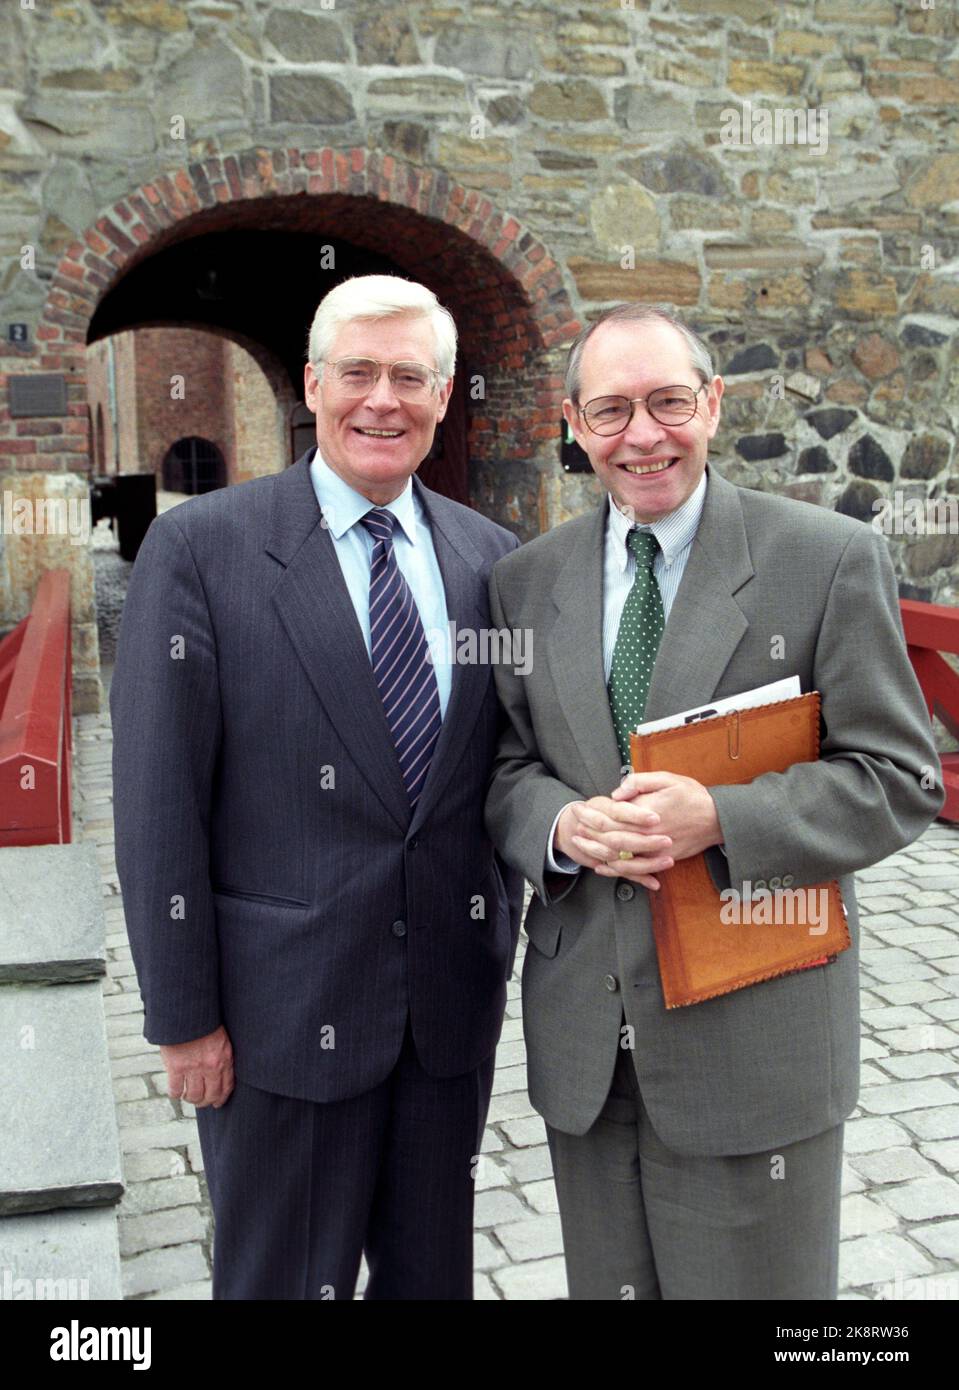 Oslo 21 May 1997. Martin Kolberg, t.h., together with IB Andersen from the Danish Embassy in Oslo. Photo; Knut Falch / NTB Stock Photo